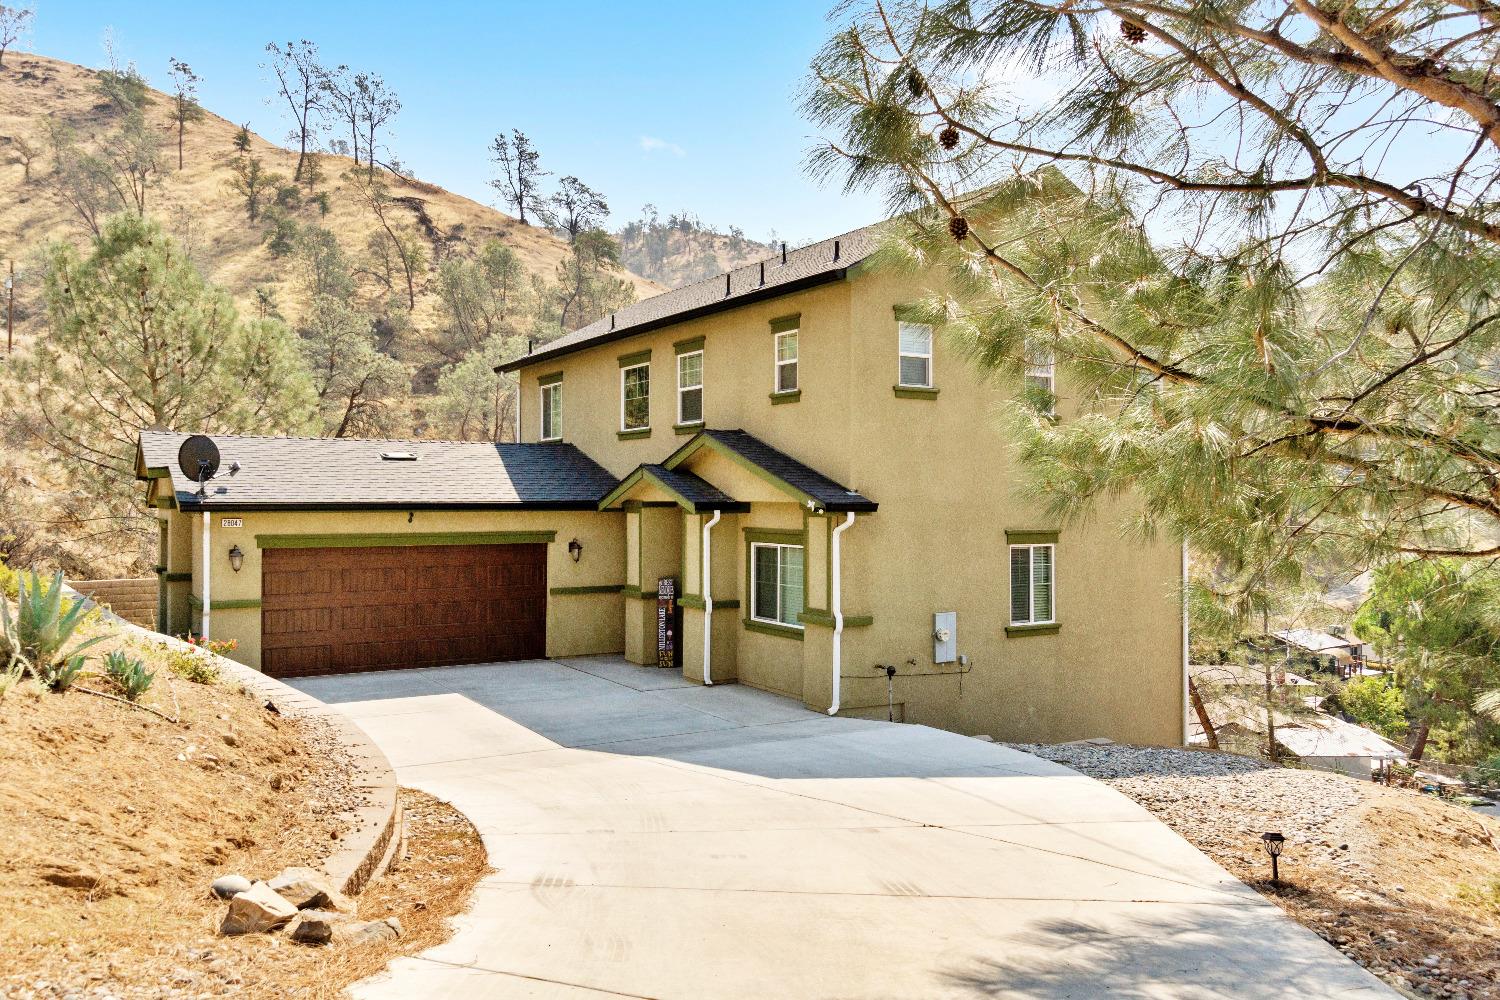 Photo of 28047 Sky Lake Dr in Friant, CA